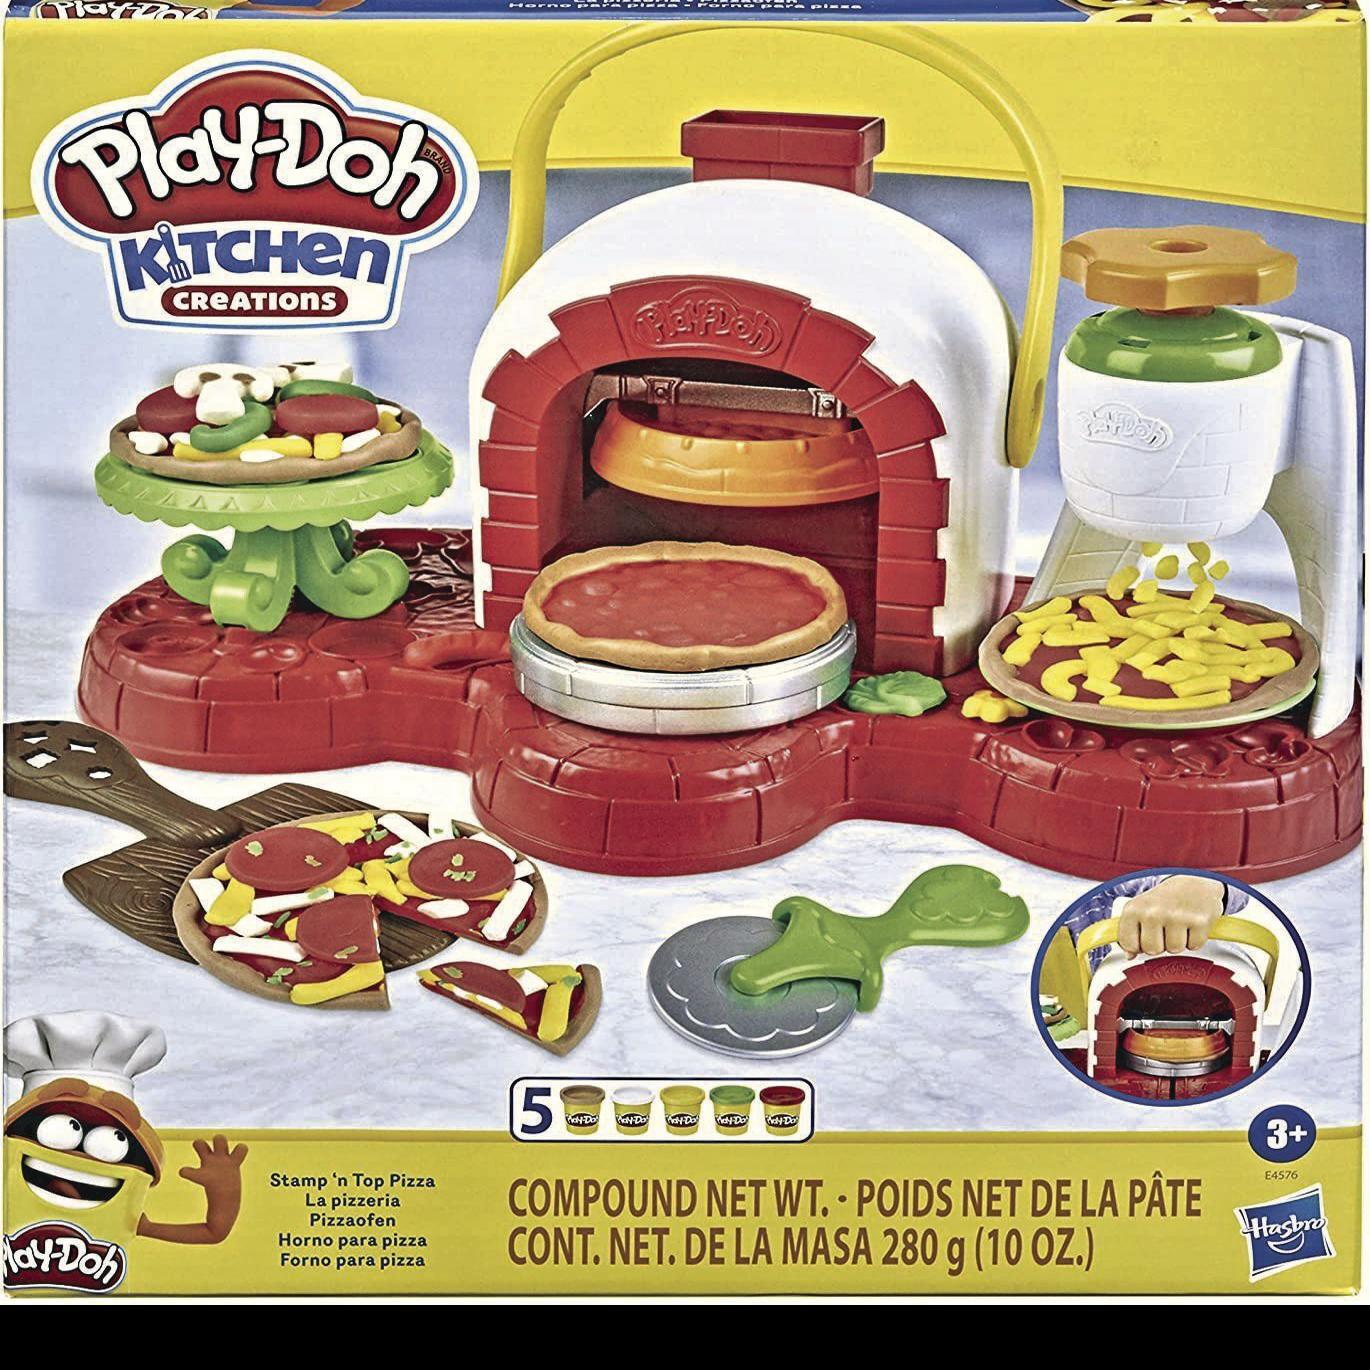 Play-Doh Kitchen Creations Stamp 'N' Top Pizza Oven